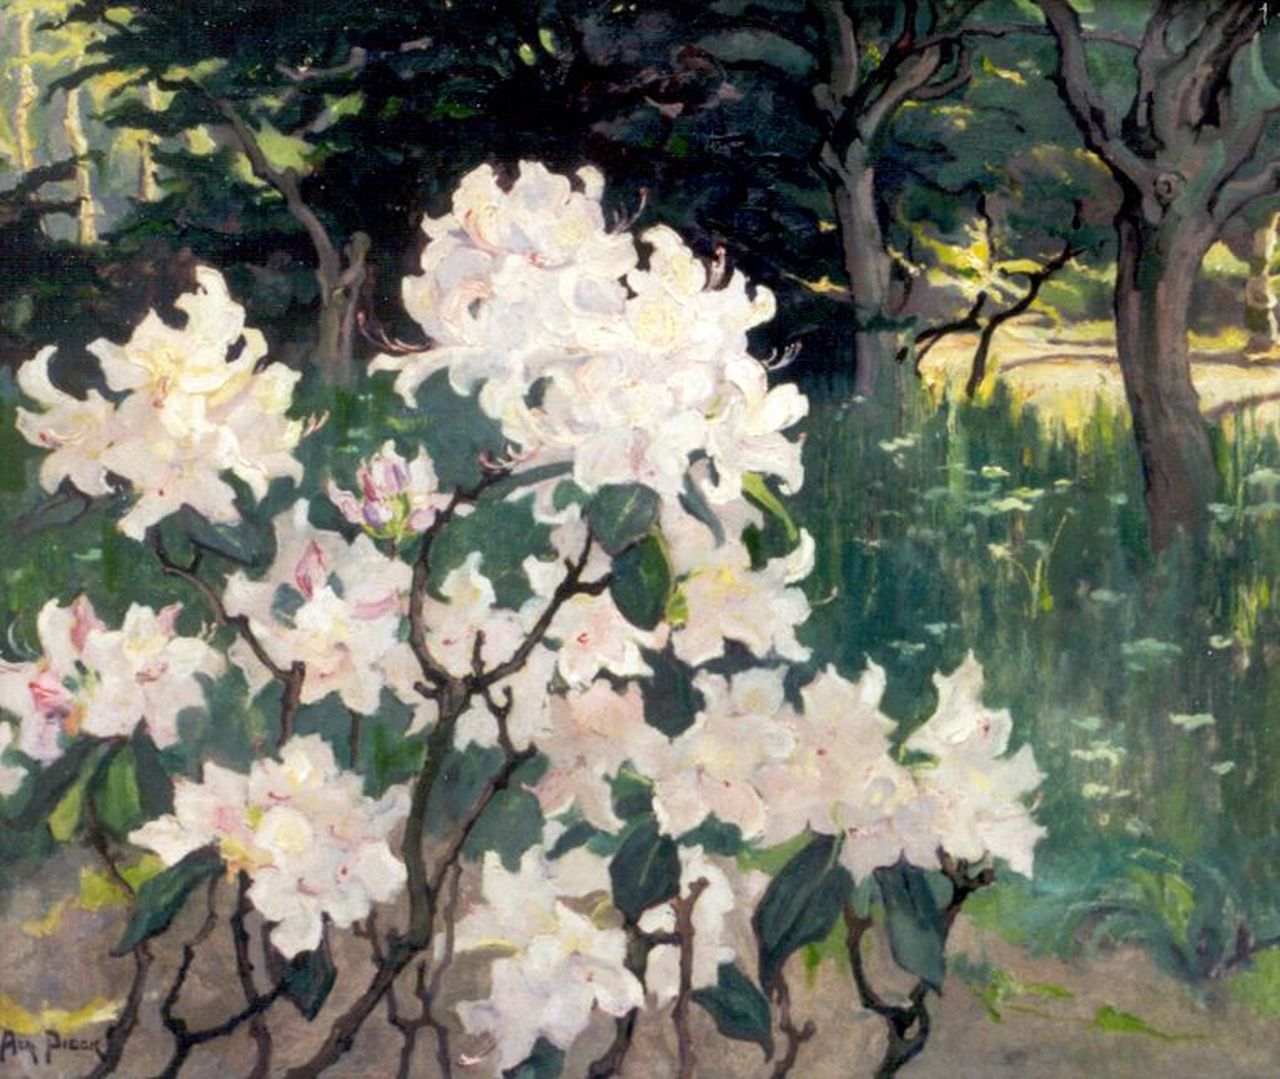 Pieck A.J.  | Adriana Jacoba 'Adri' Pieck, Rododendrons, oil on canvas 55.9 x 65.5 cm, signed l.l.